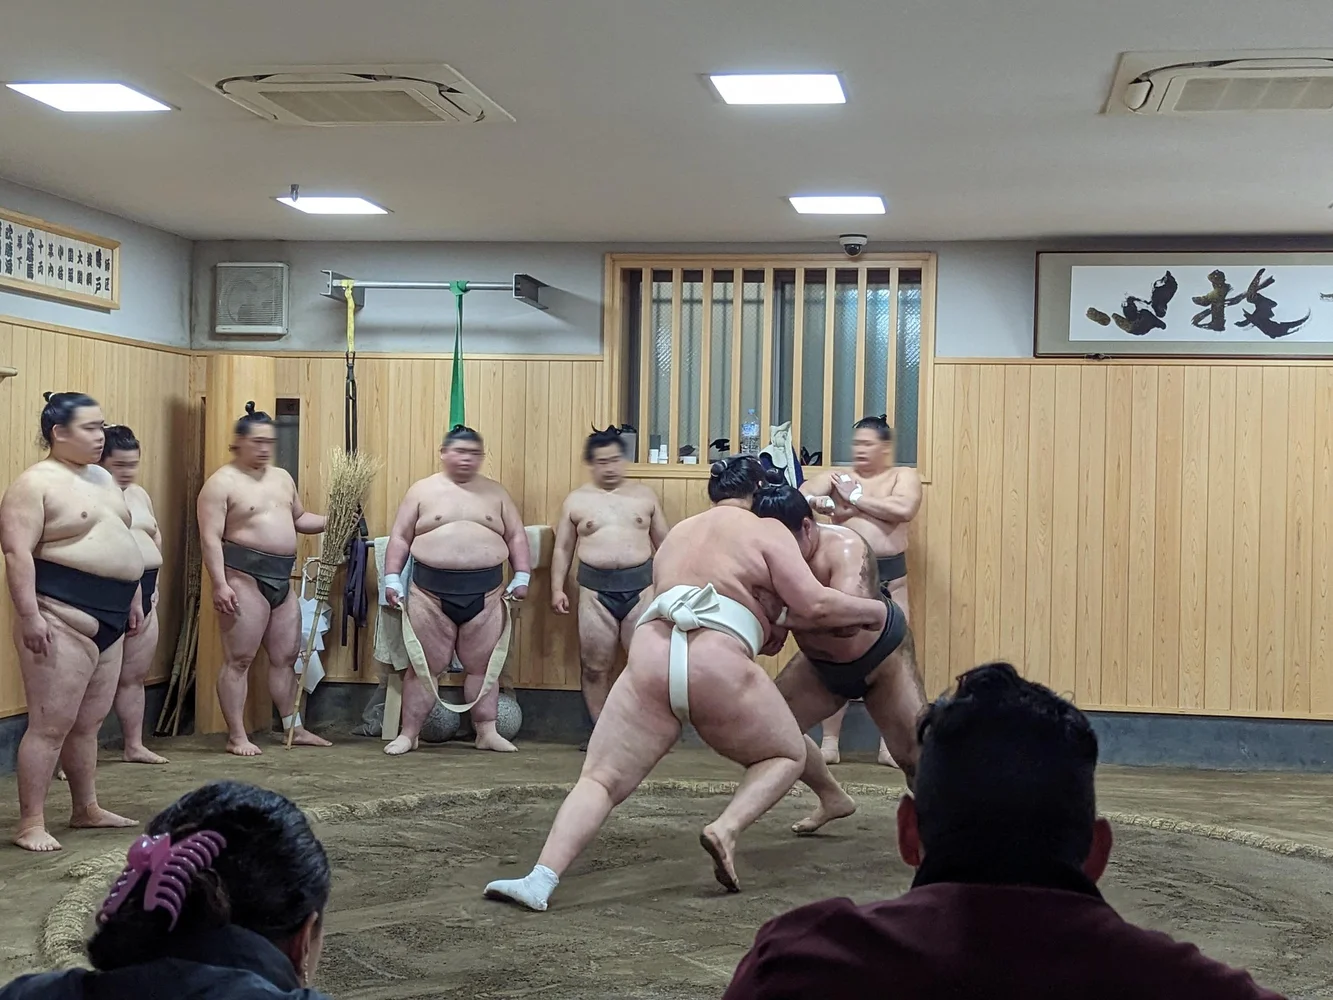 Book a Morning Sumo Practice Viewing Tour in Tokyo